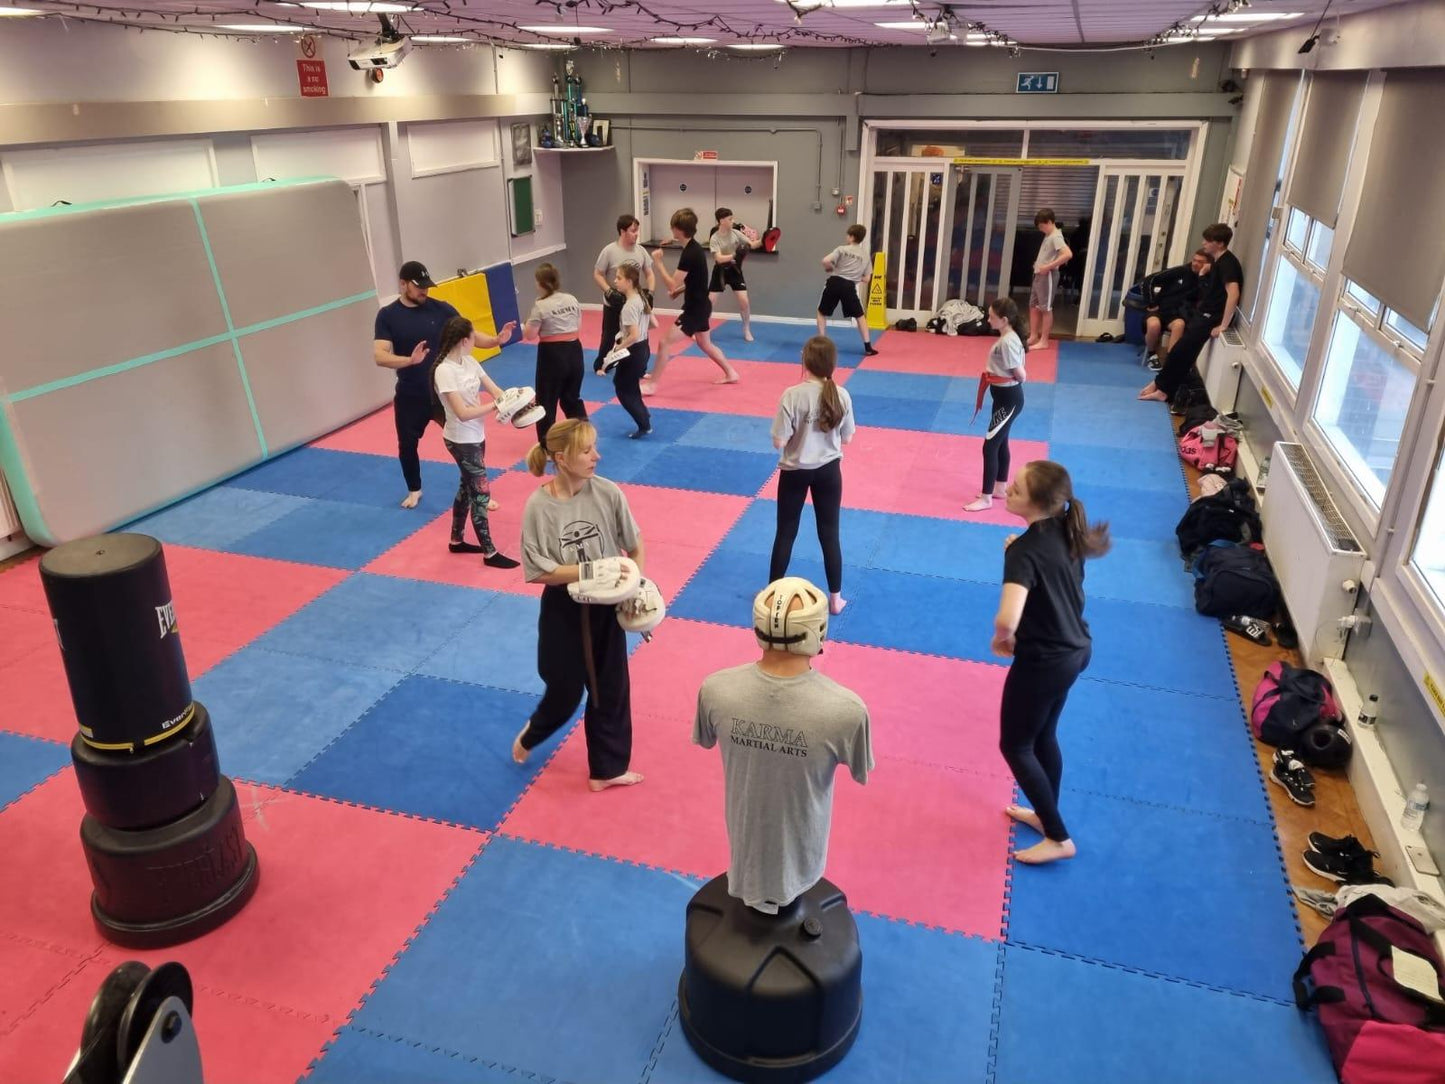 Teenager/Adult Kick Boxing | 1 Day Per Week | Pay Monthly - Karma Martial Arts